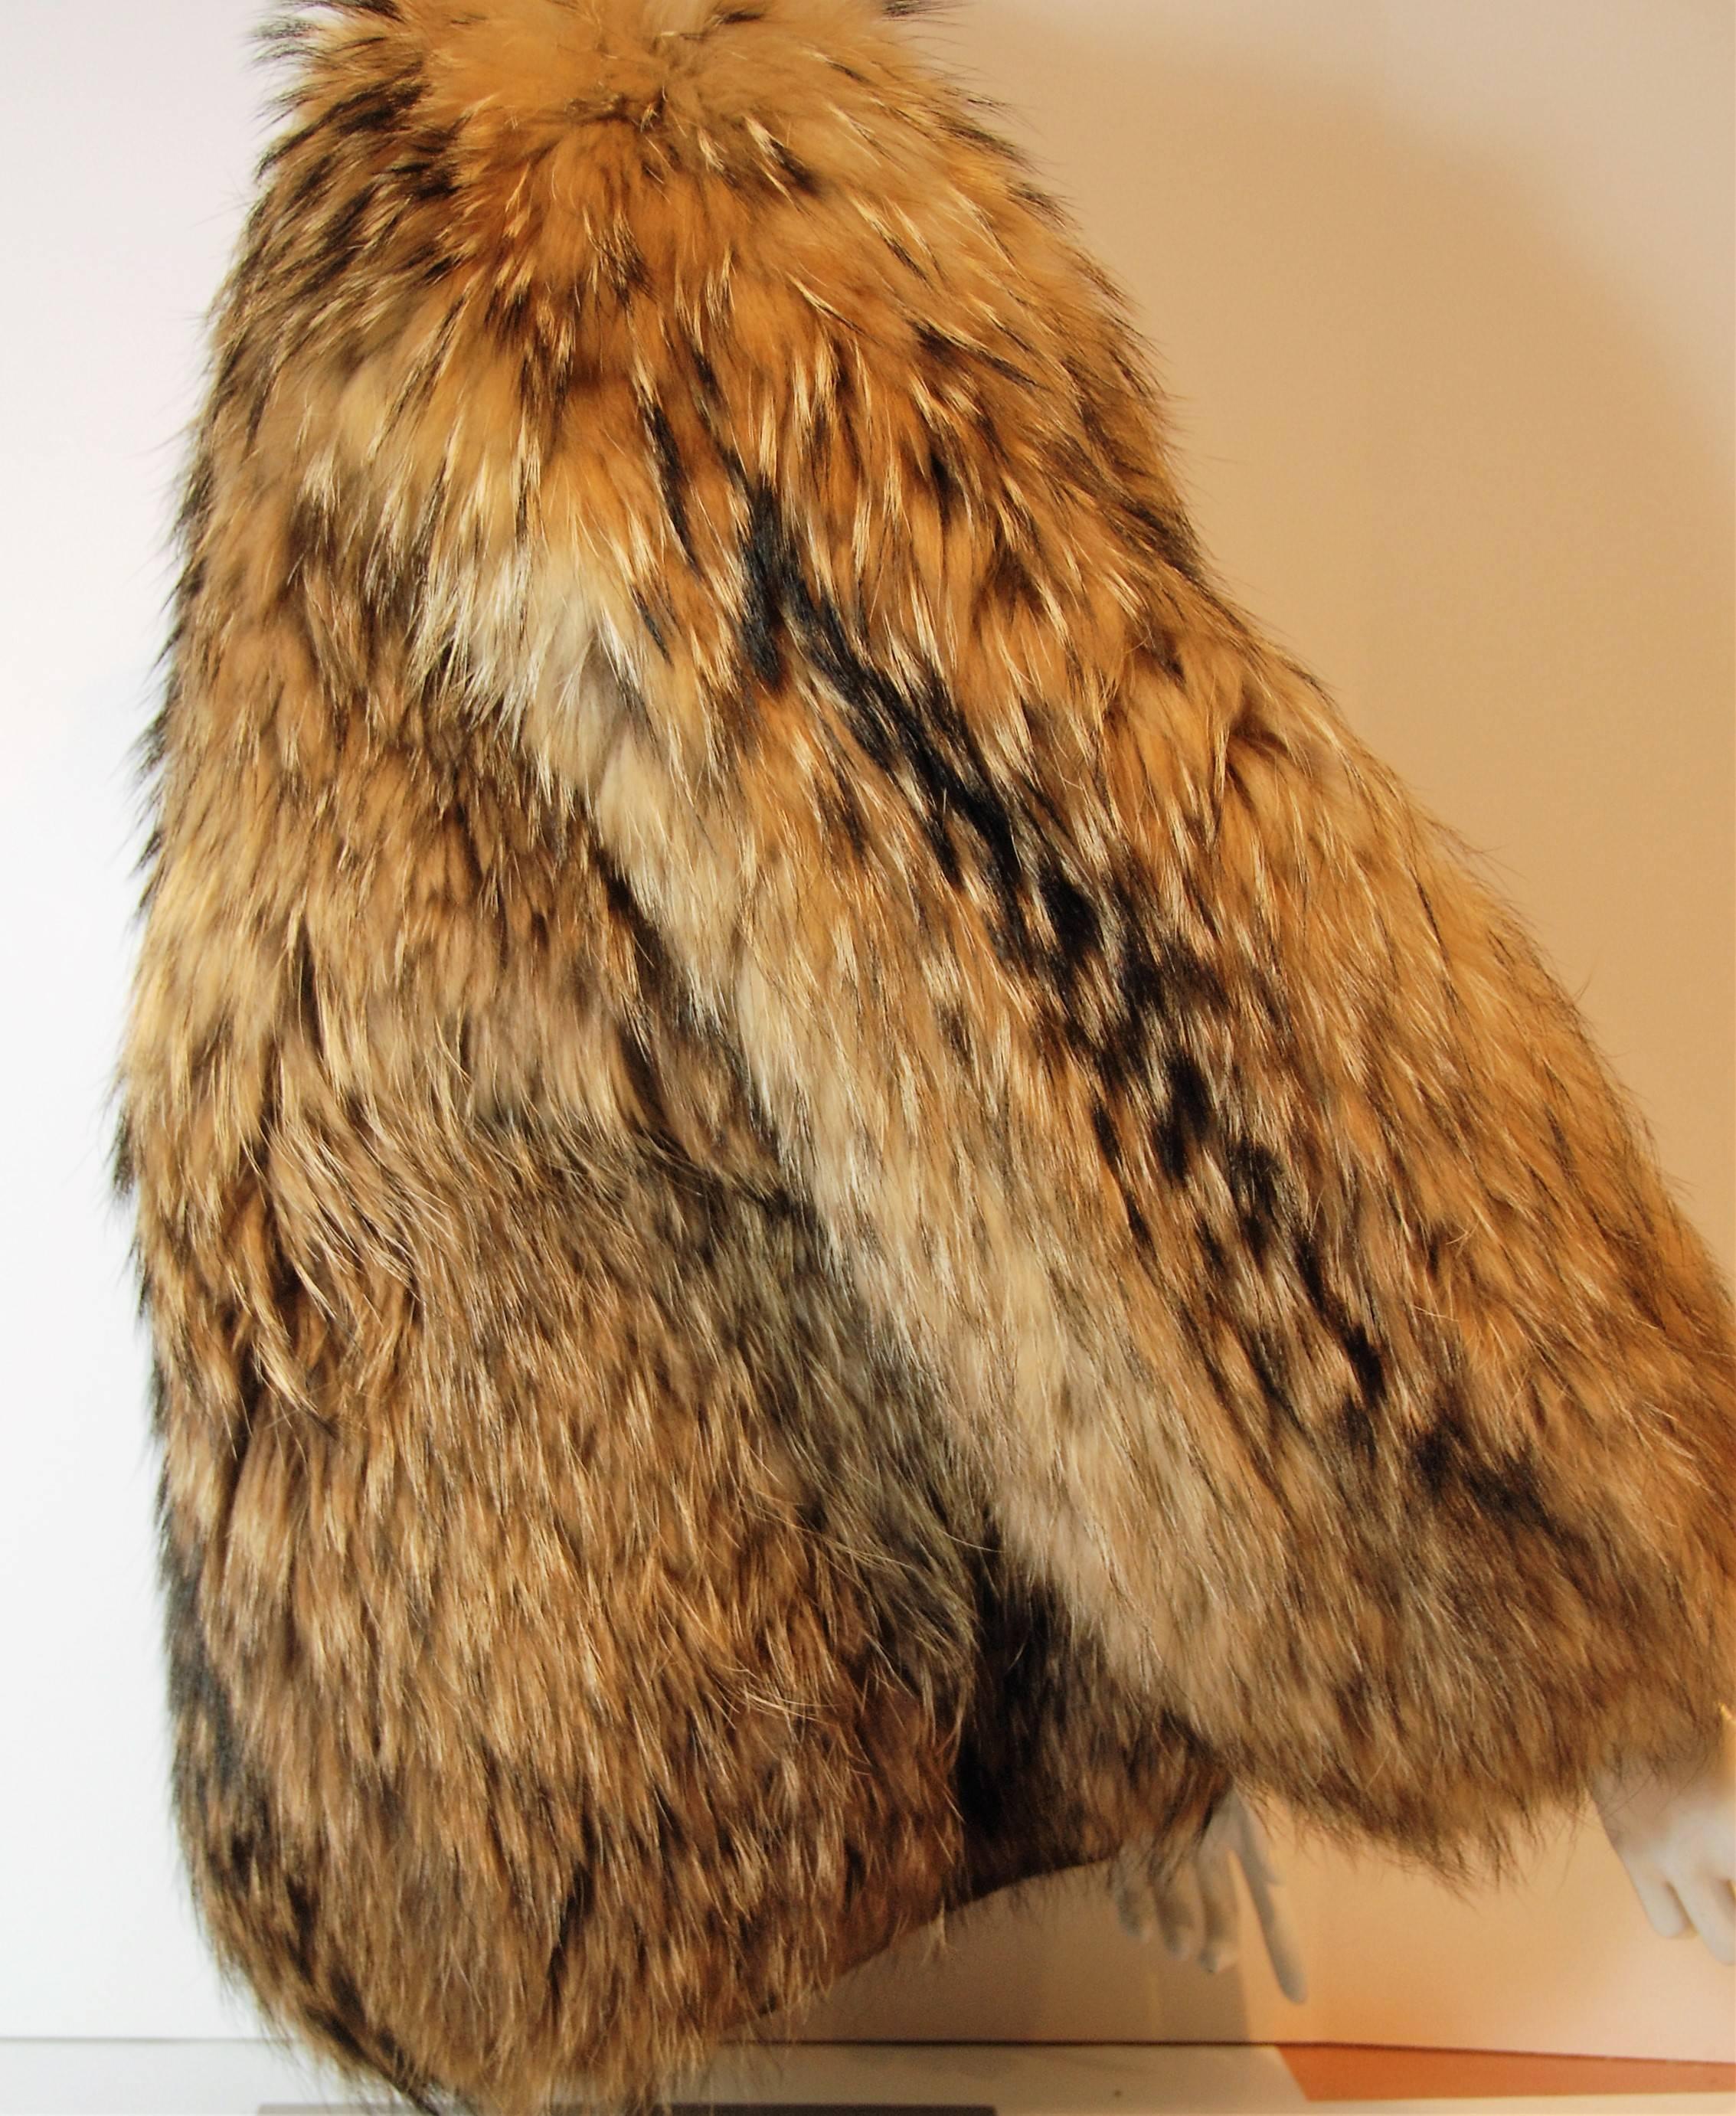 Fabulous Hermes tunaki fur jacket.  Extremely lush and fine furs. The matching of the pelts is done extremely well. There is brown knit ribbing for the closure and along the base of the jacket, and at the wrists, giving the fur a sportier feel,